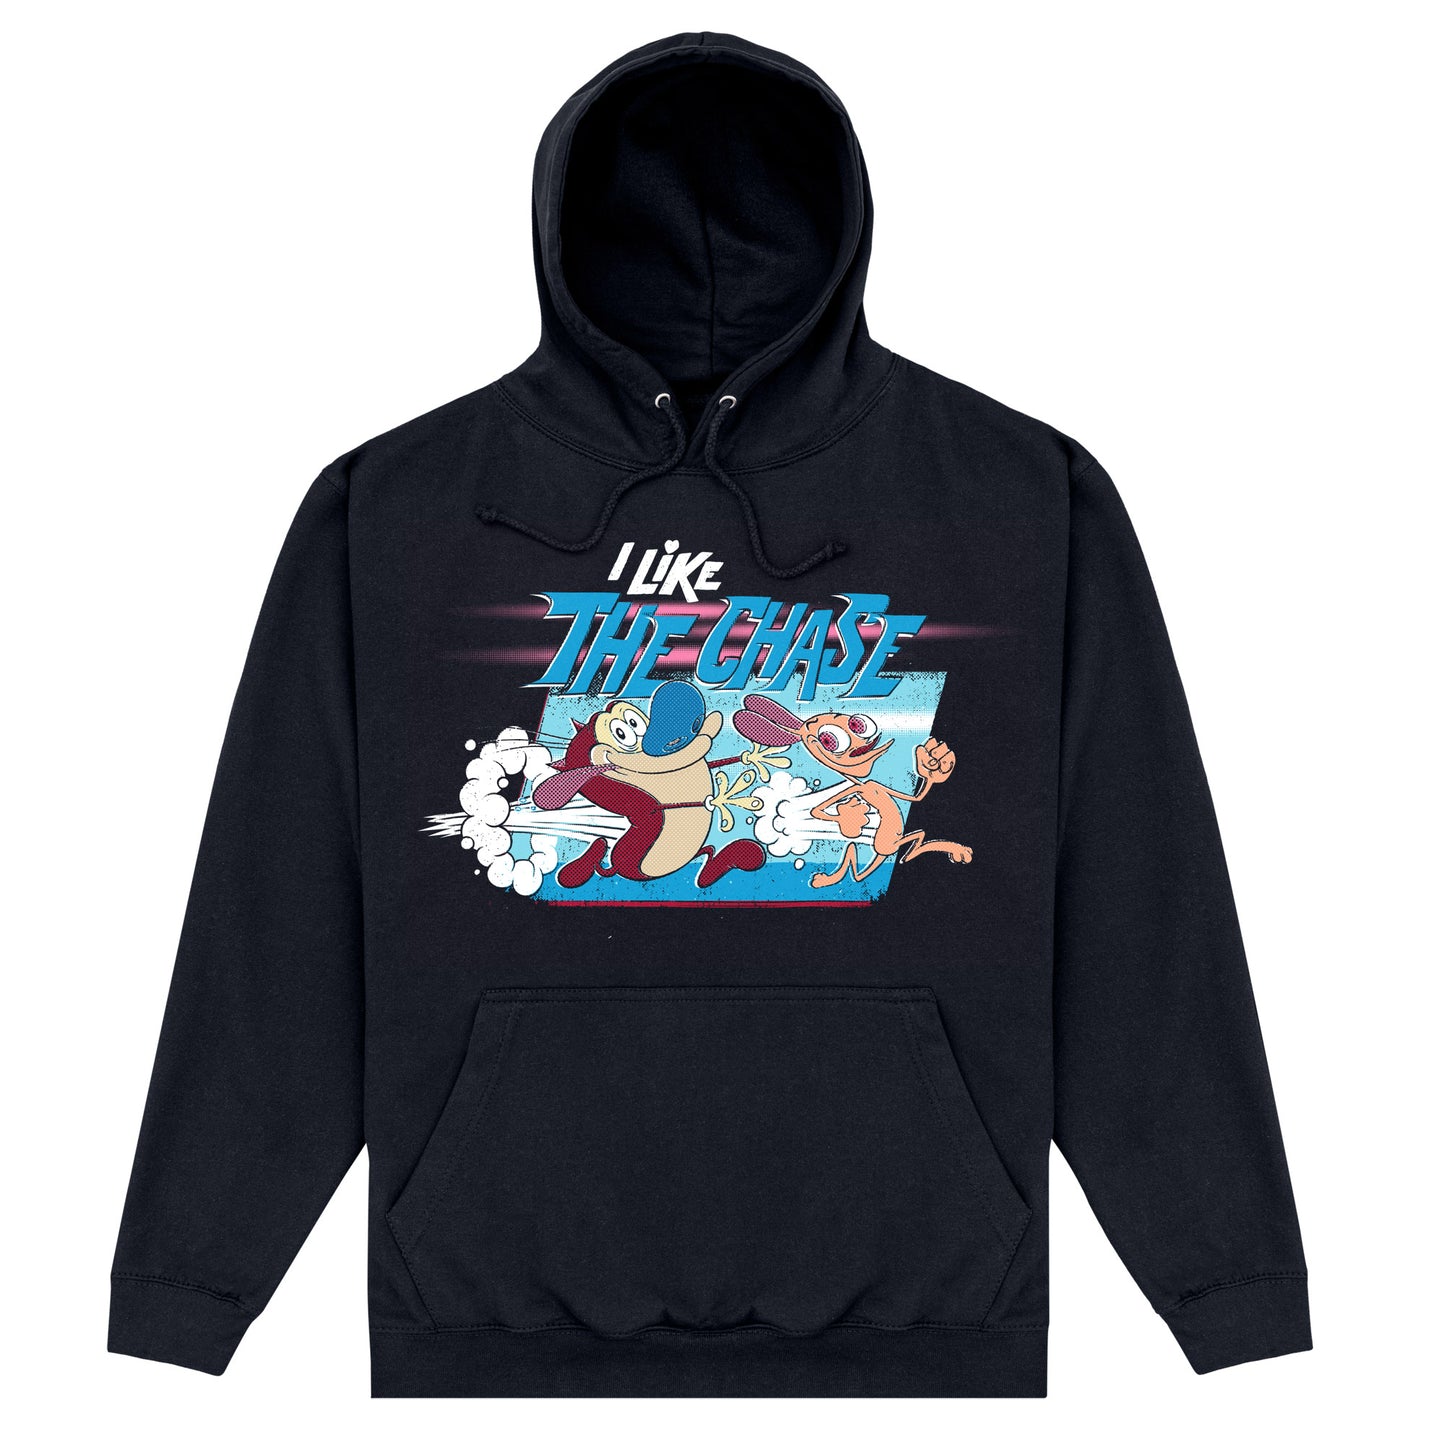 Ren & Stimpy The Chase Hoodie